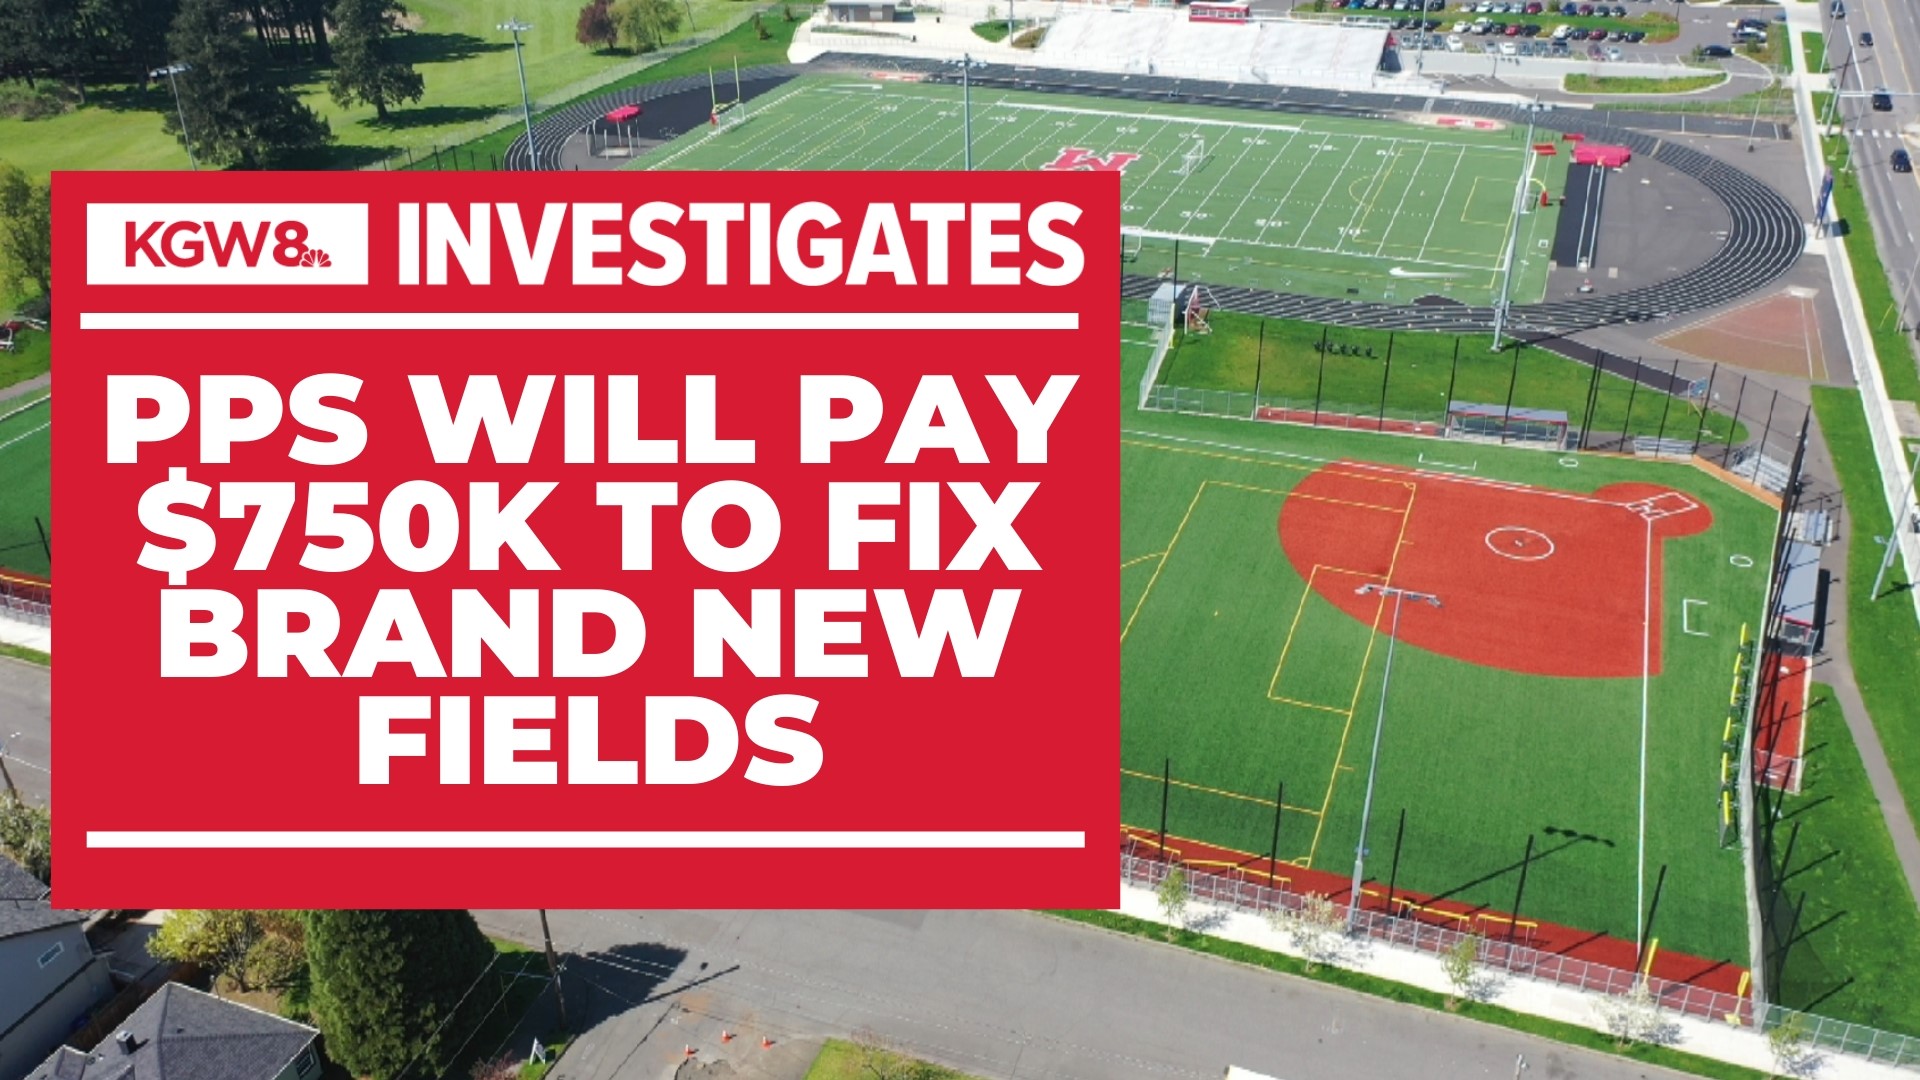 A KGW investigation found the baseball and softball fields have been unusable for two years following a multi-million dollar renovation at McDaniel High School.